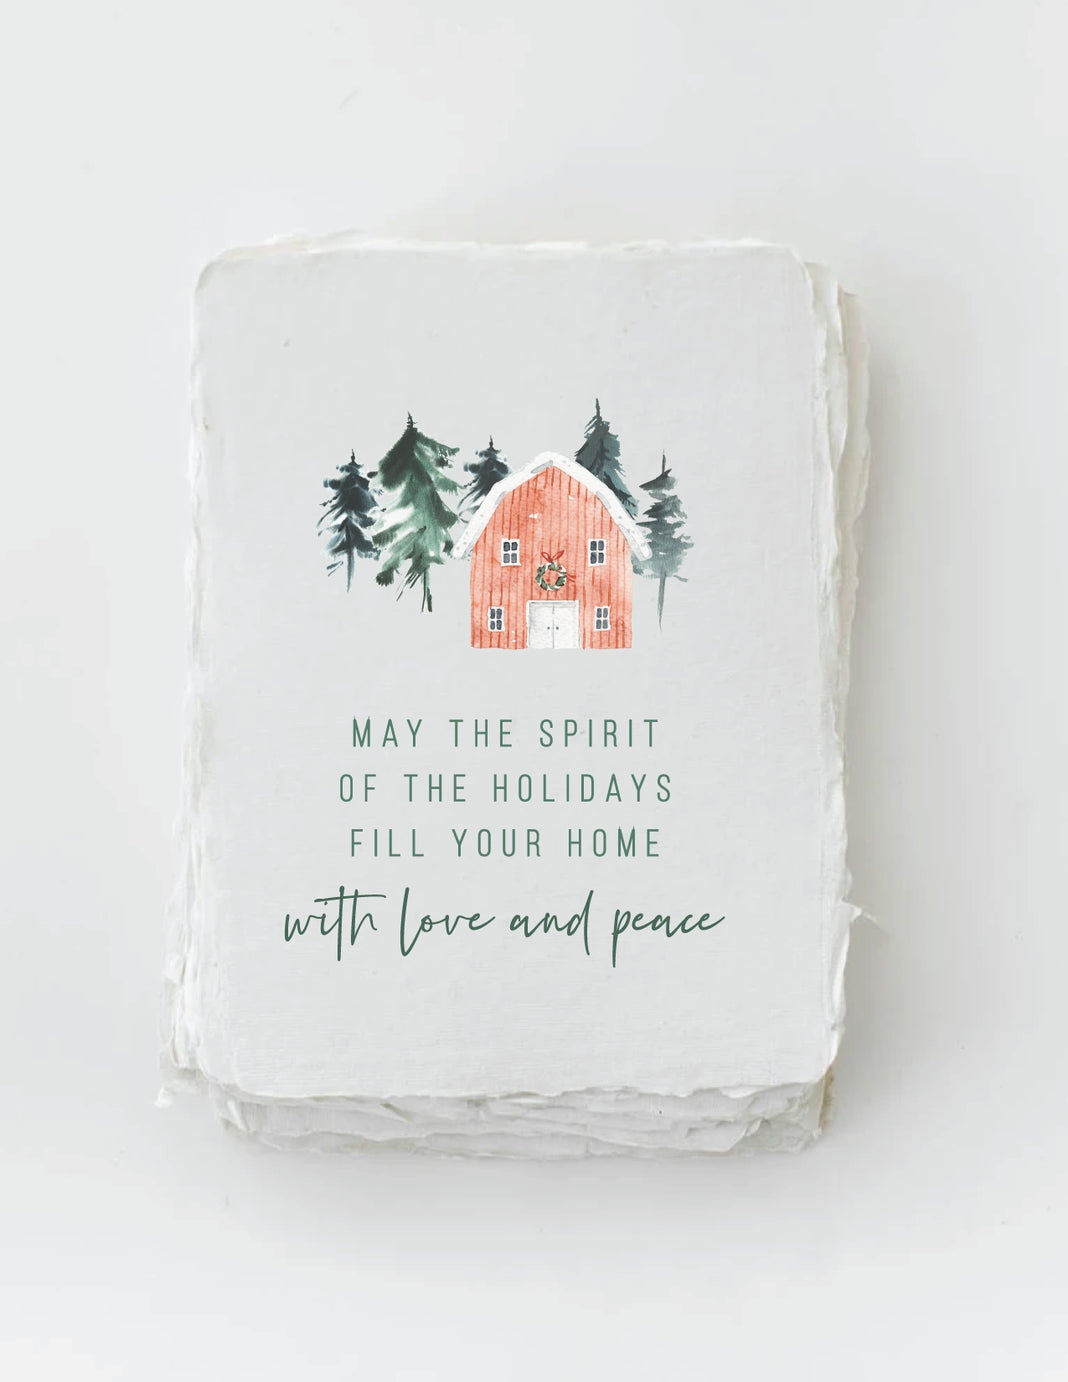 With Love and Peace - Farm Christmas Greeting Card